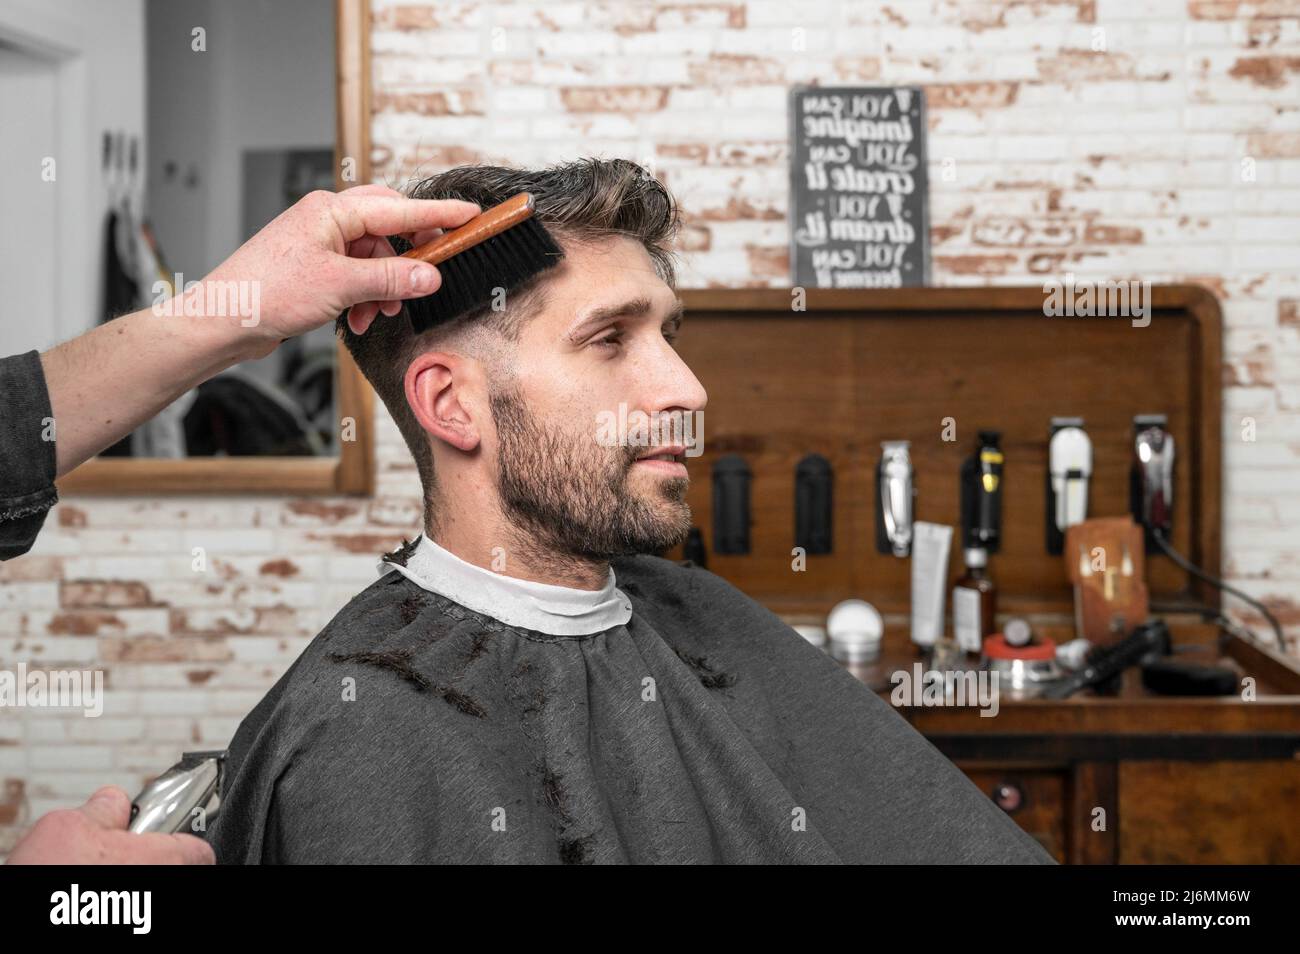 Shot of a barber using a brush on his client's beard. High quality photography. Stock Photo